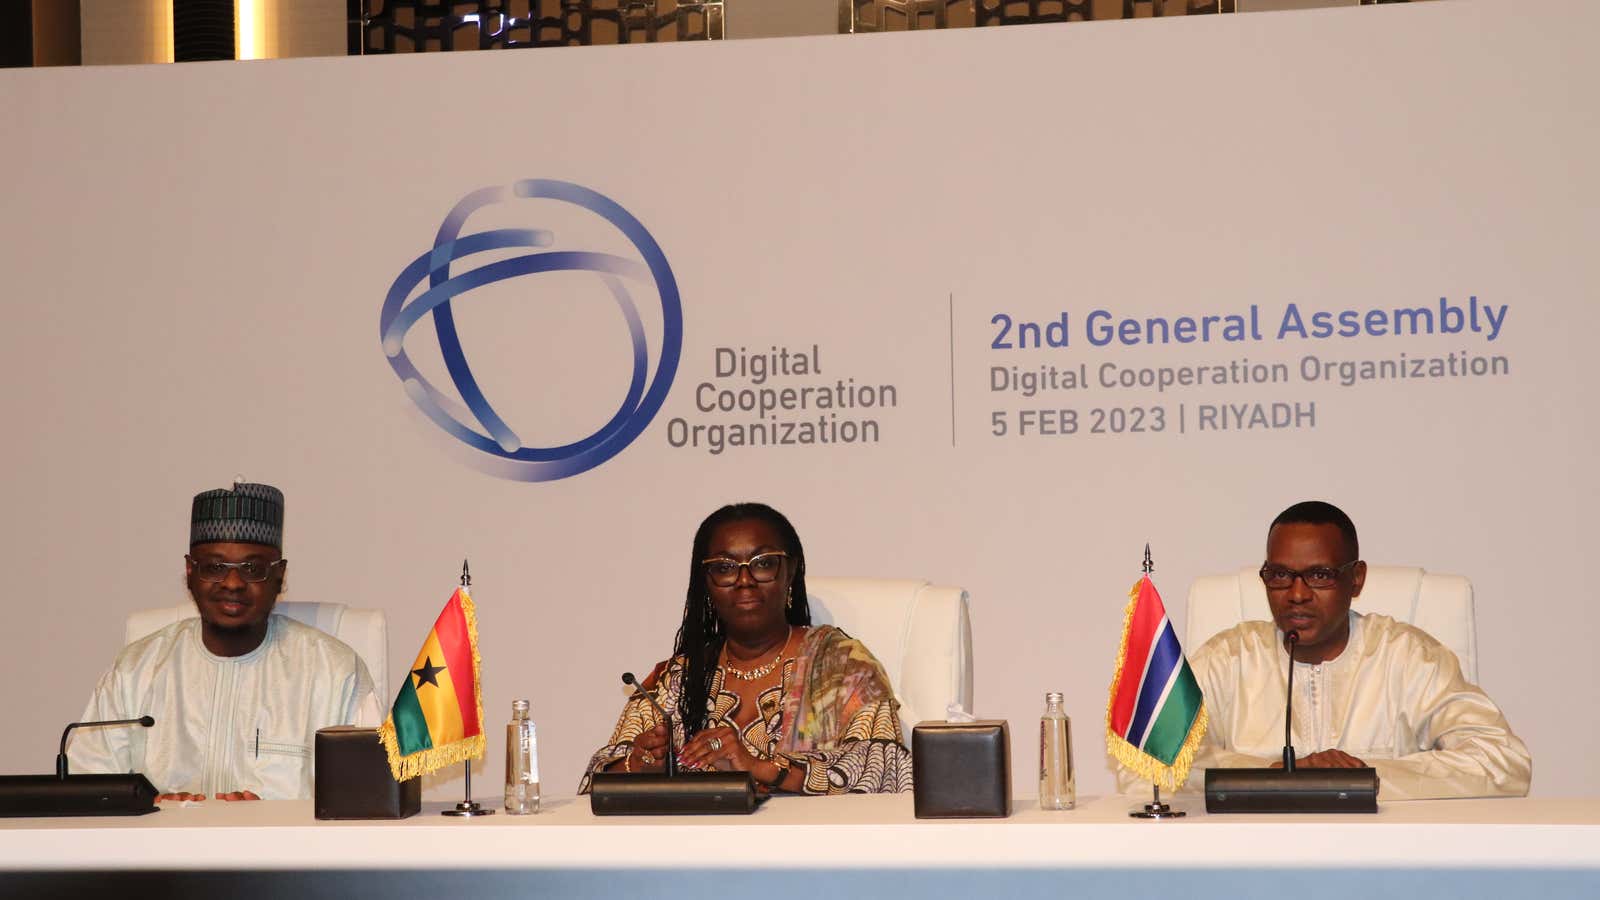 Nigeria welcomed Ghana and The Gambia as new members of the Digital Cooperation Organization.